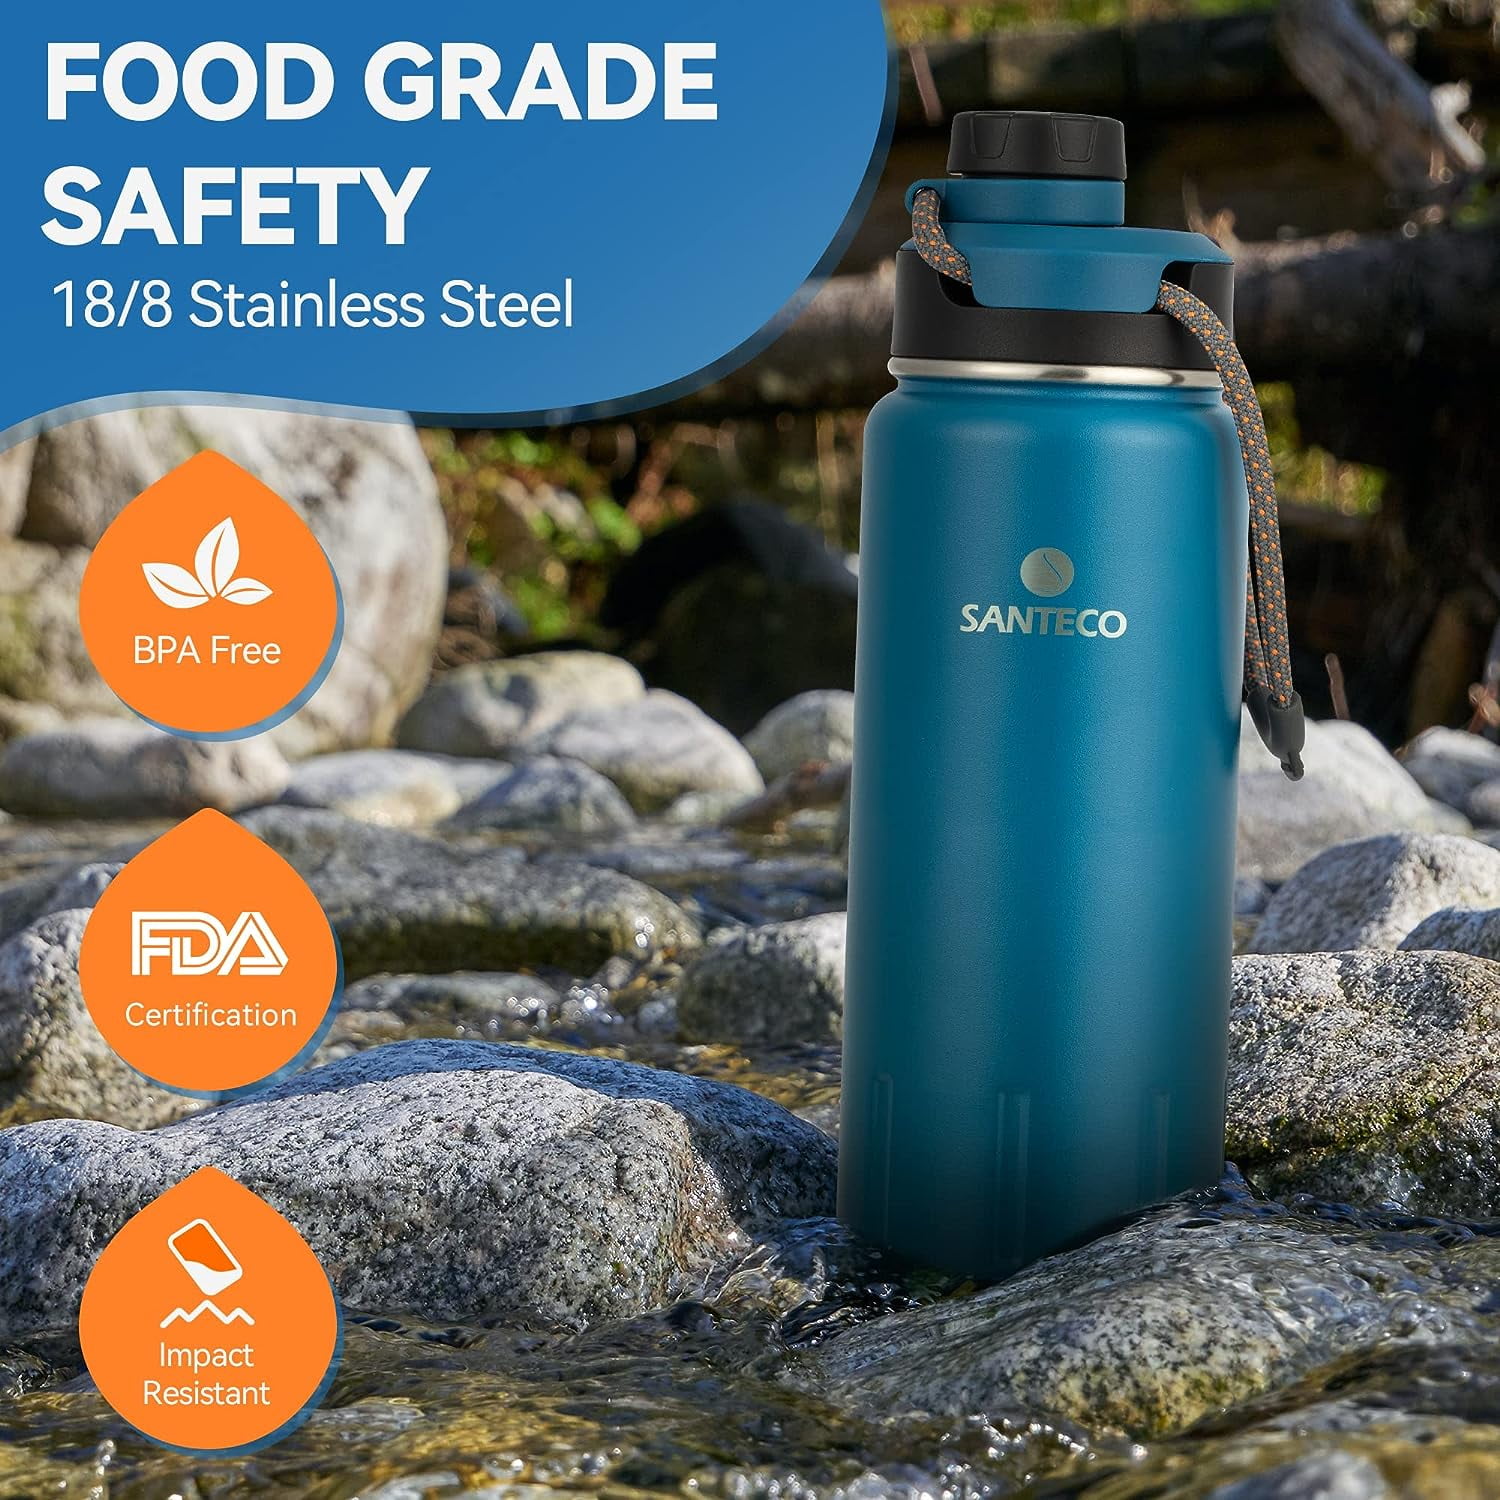 24 Oz. Stainless Insulated Water Bottle in a Customizable Appellations —  Mercantile 12